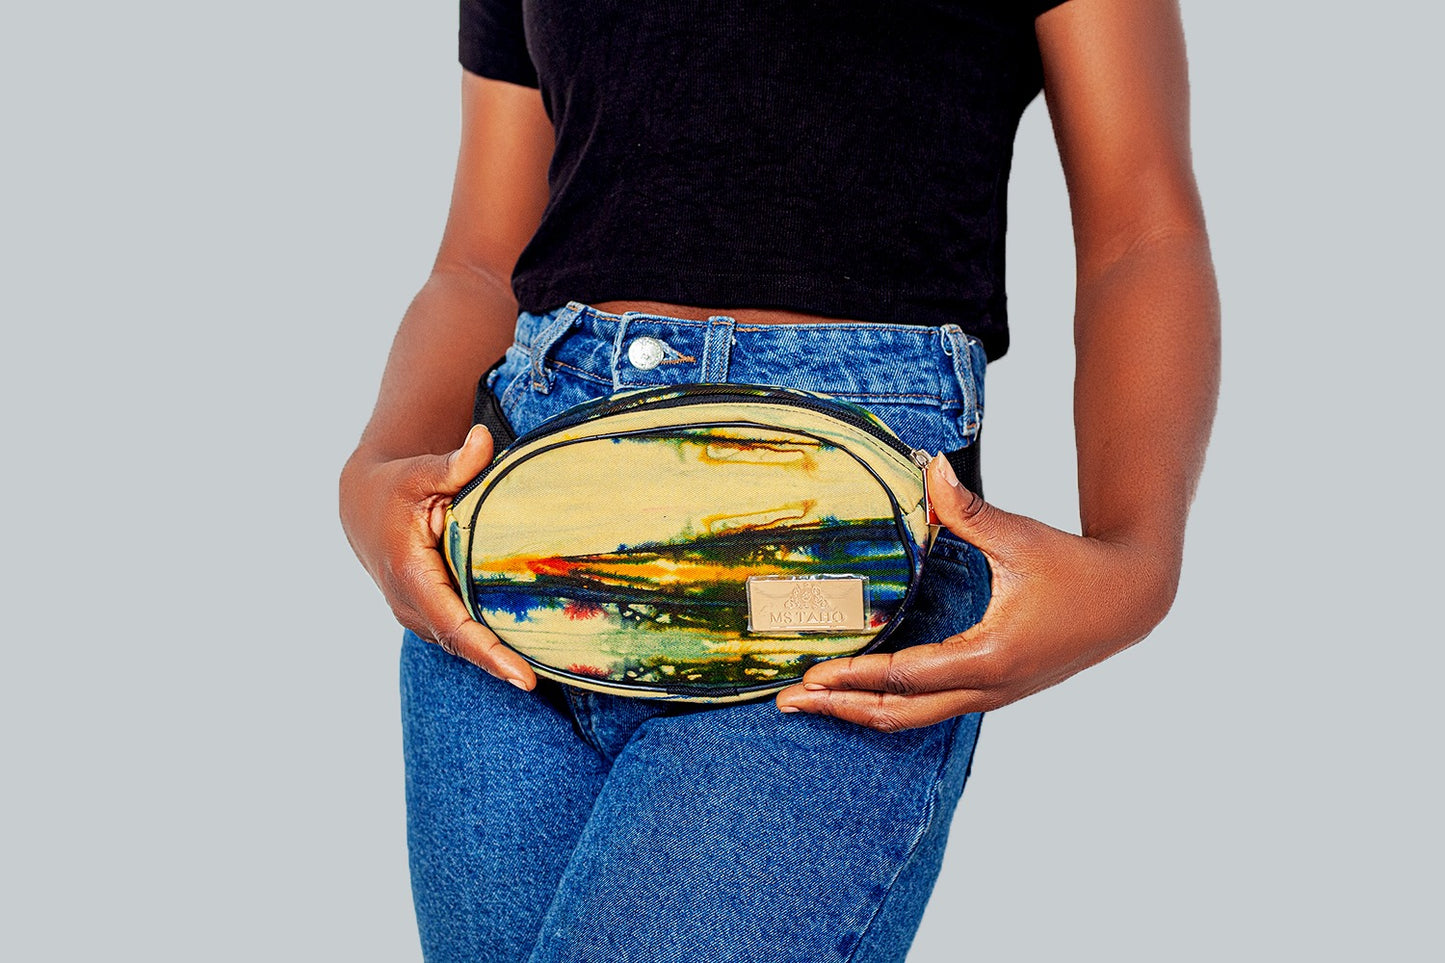 Simone African Prints Fannypack